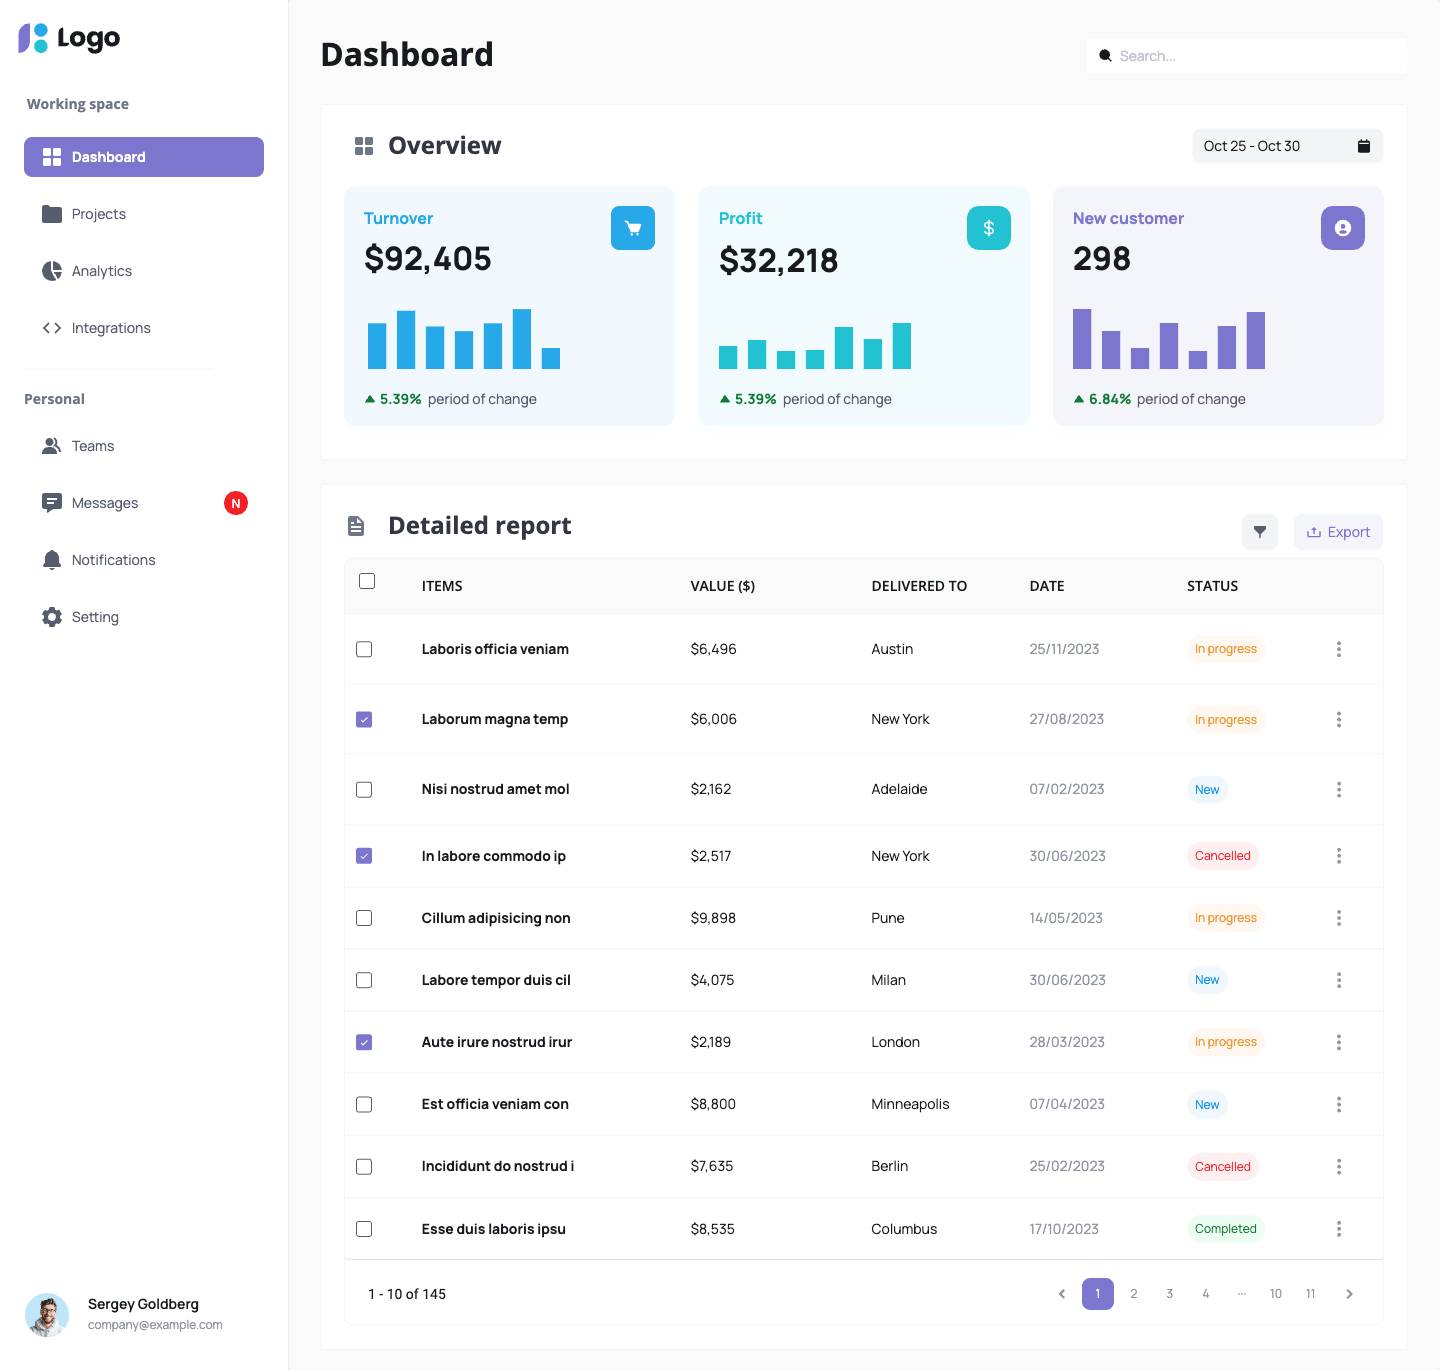 Dashboard - Charts & tables 1